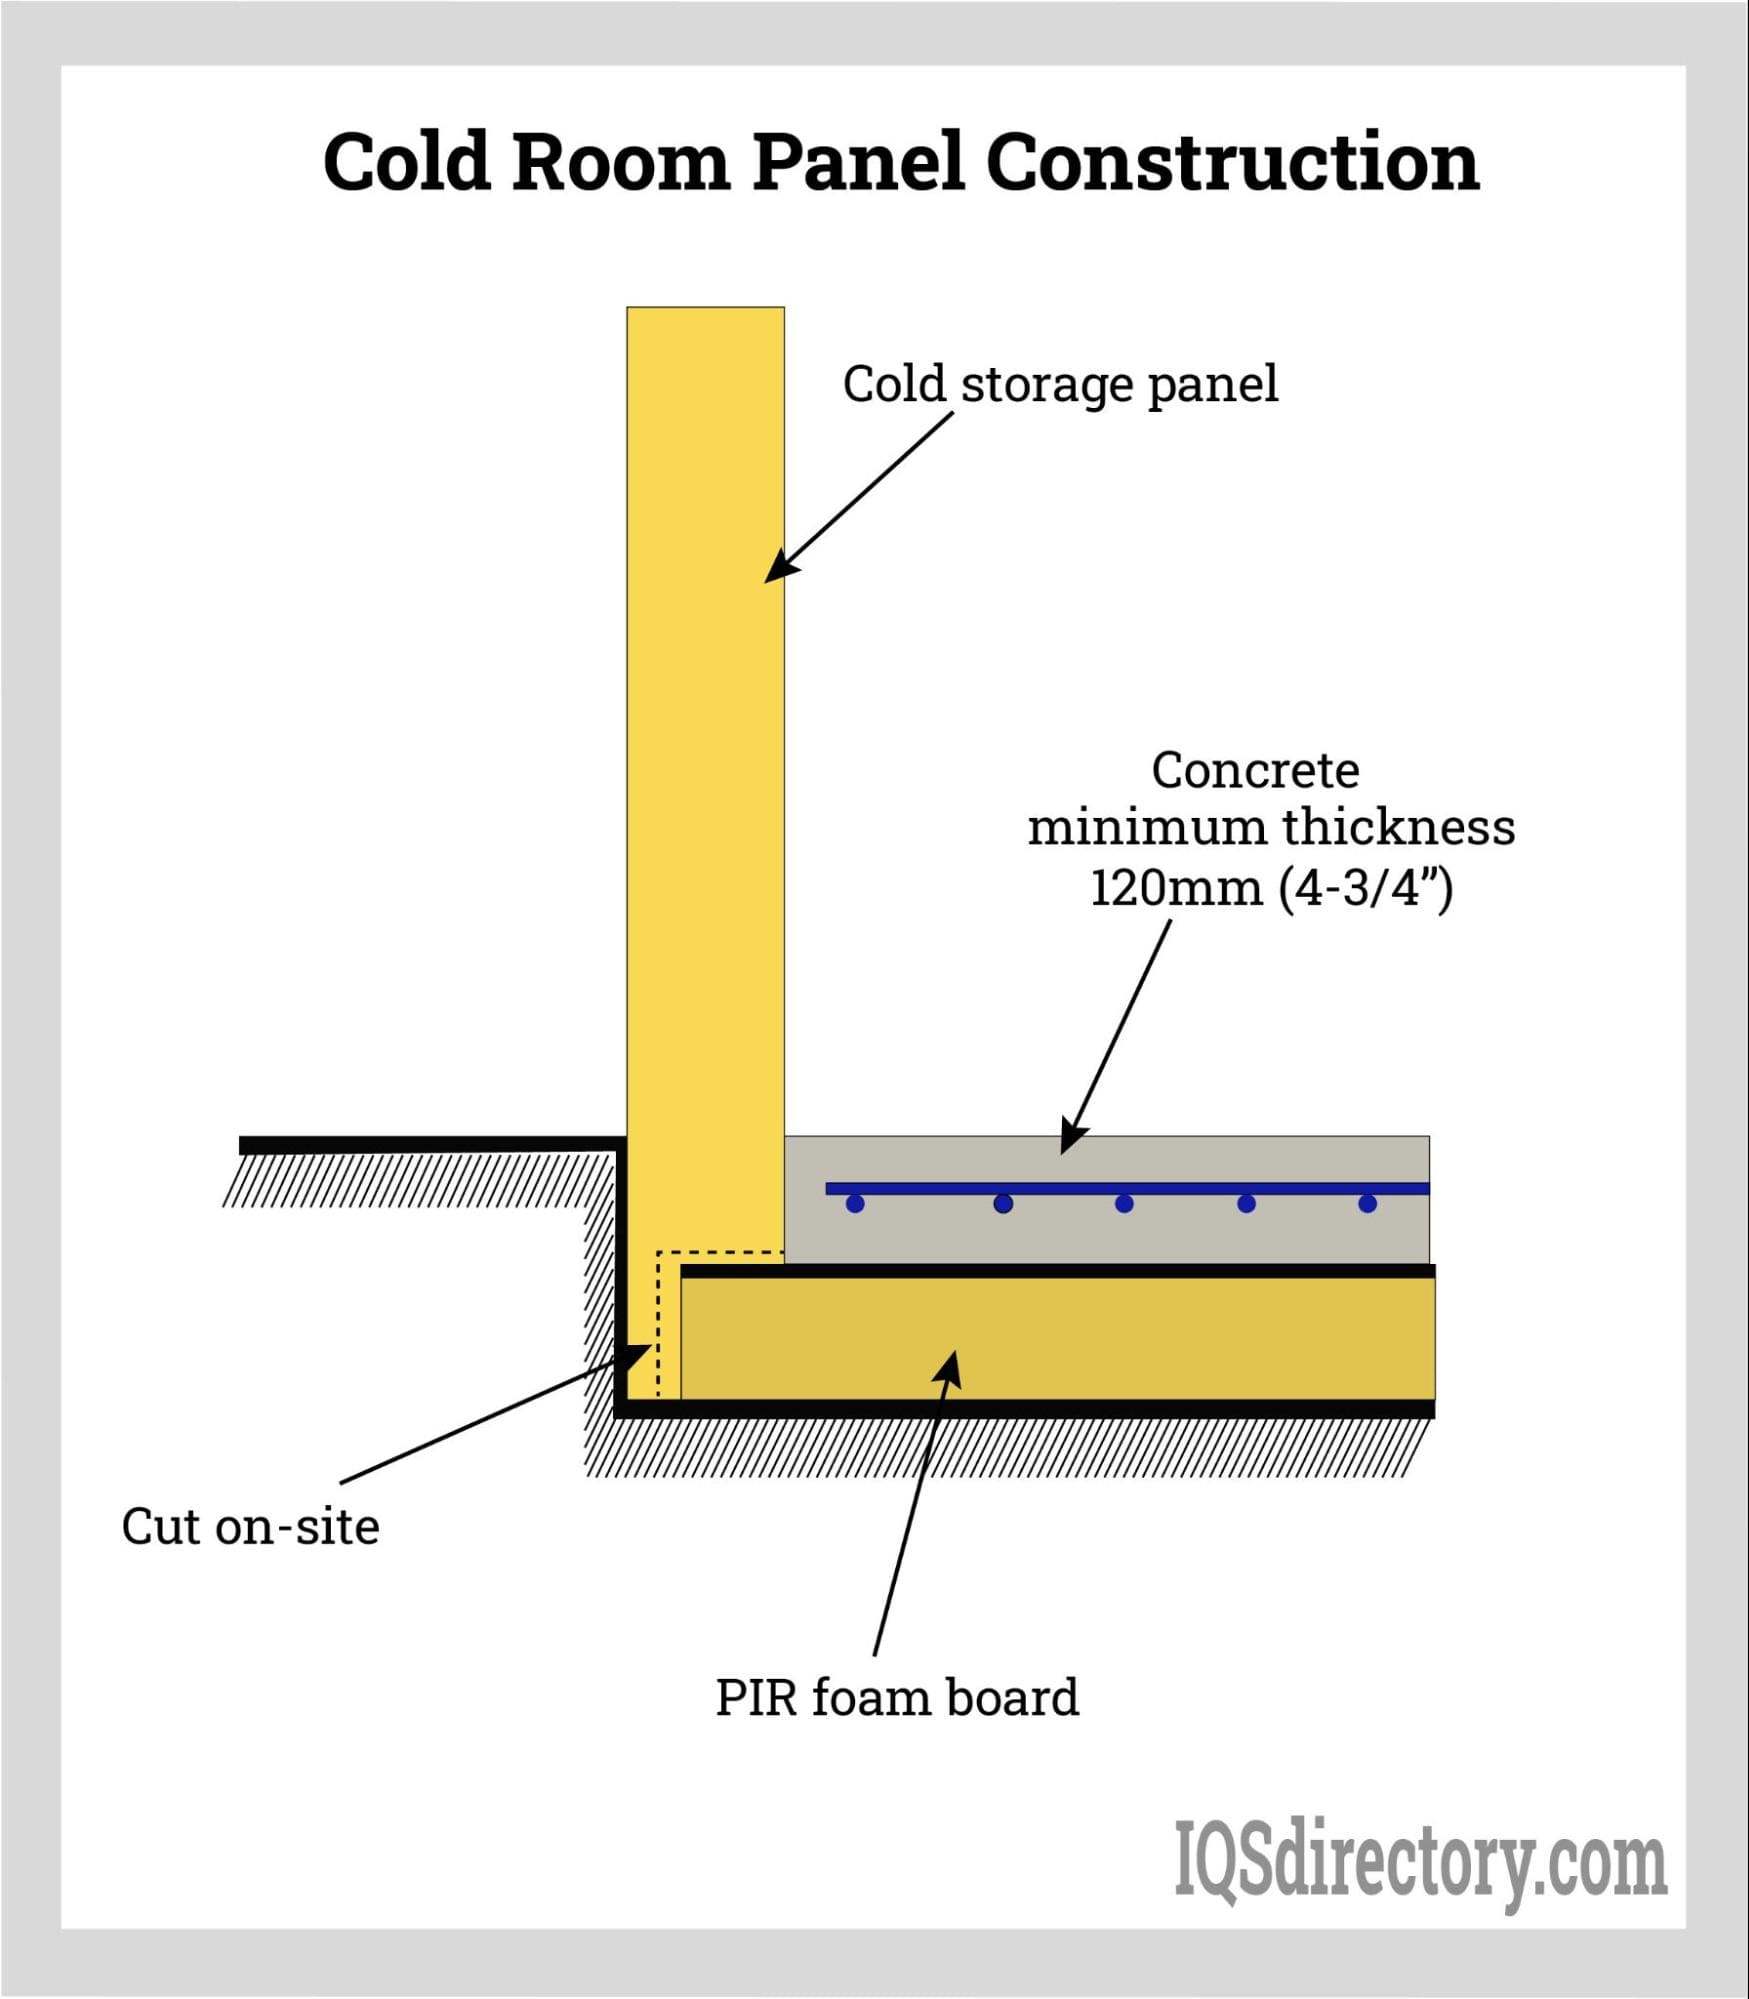 Cold Room Panel Construction